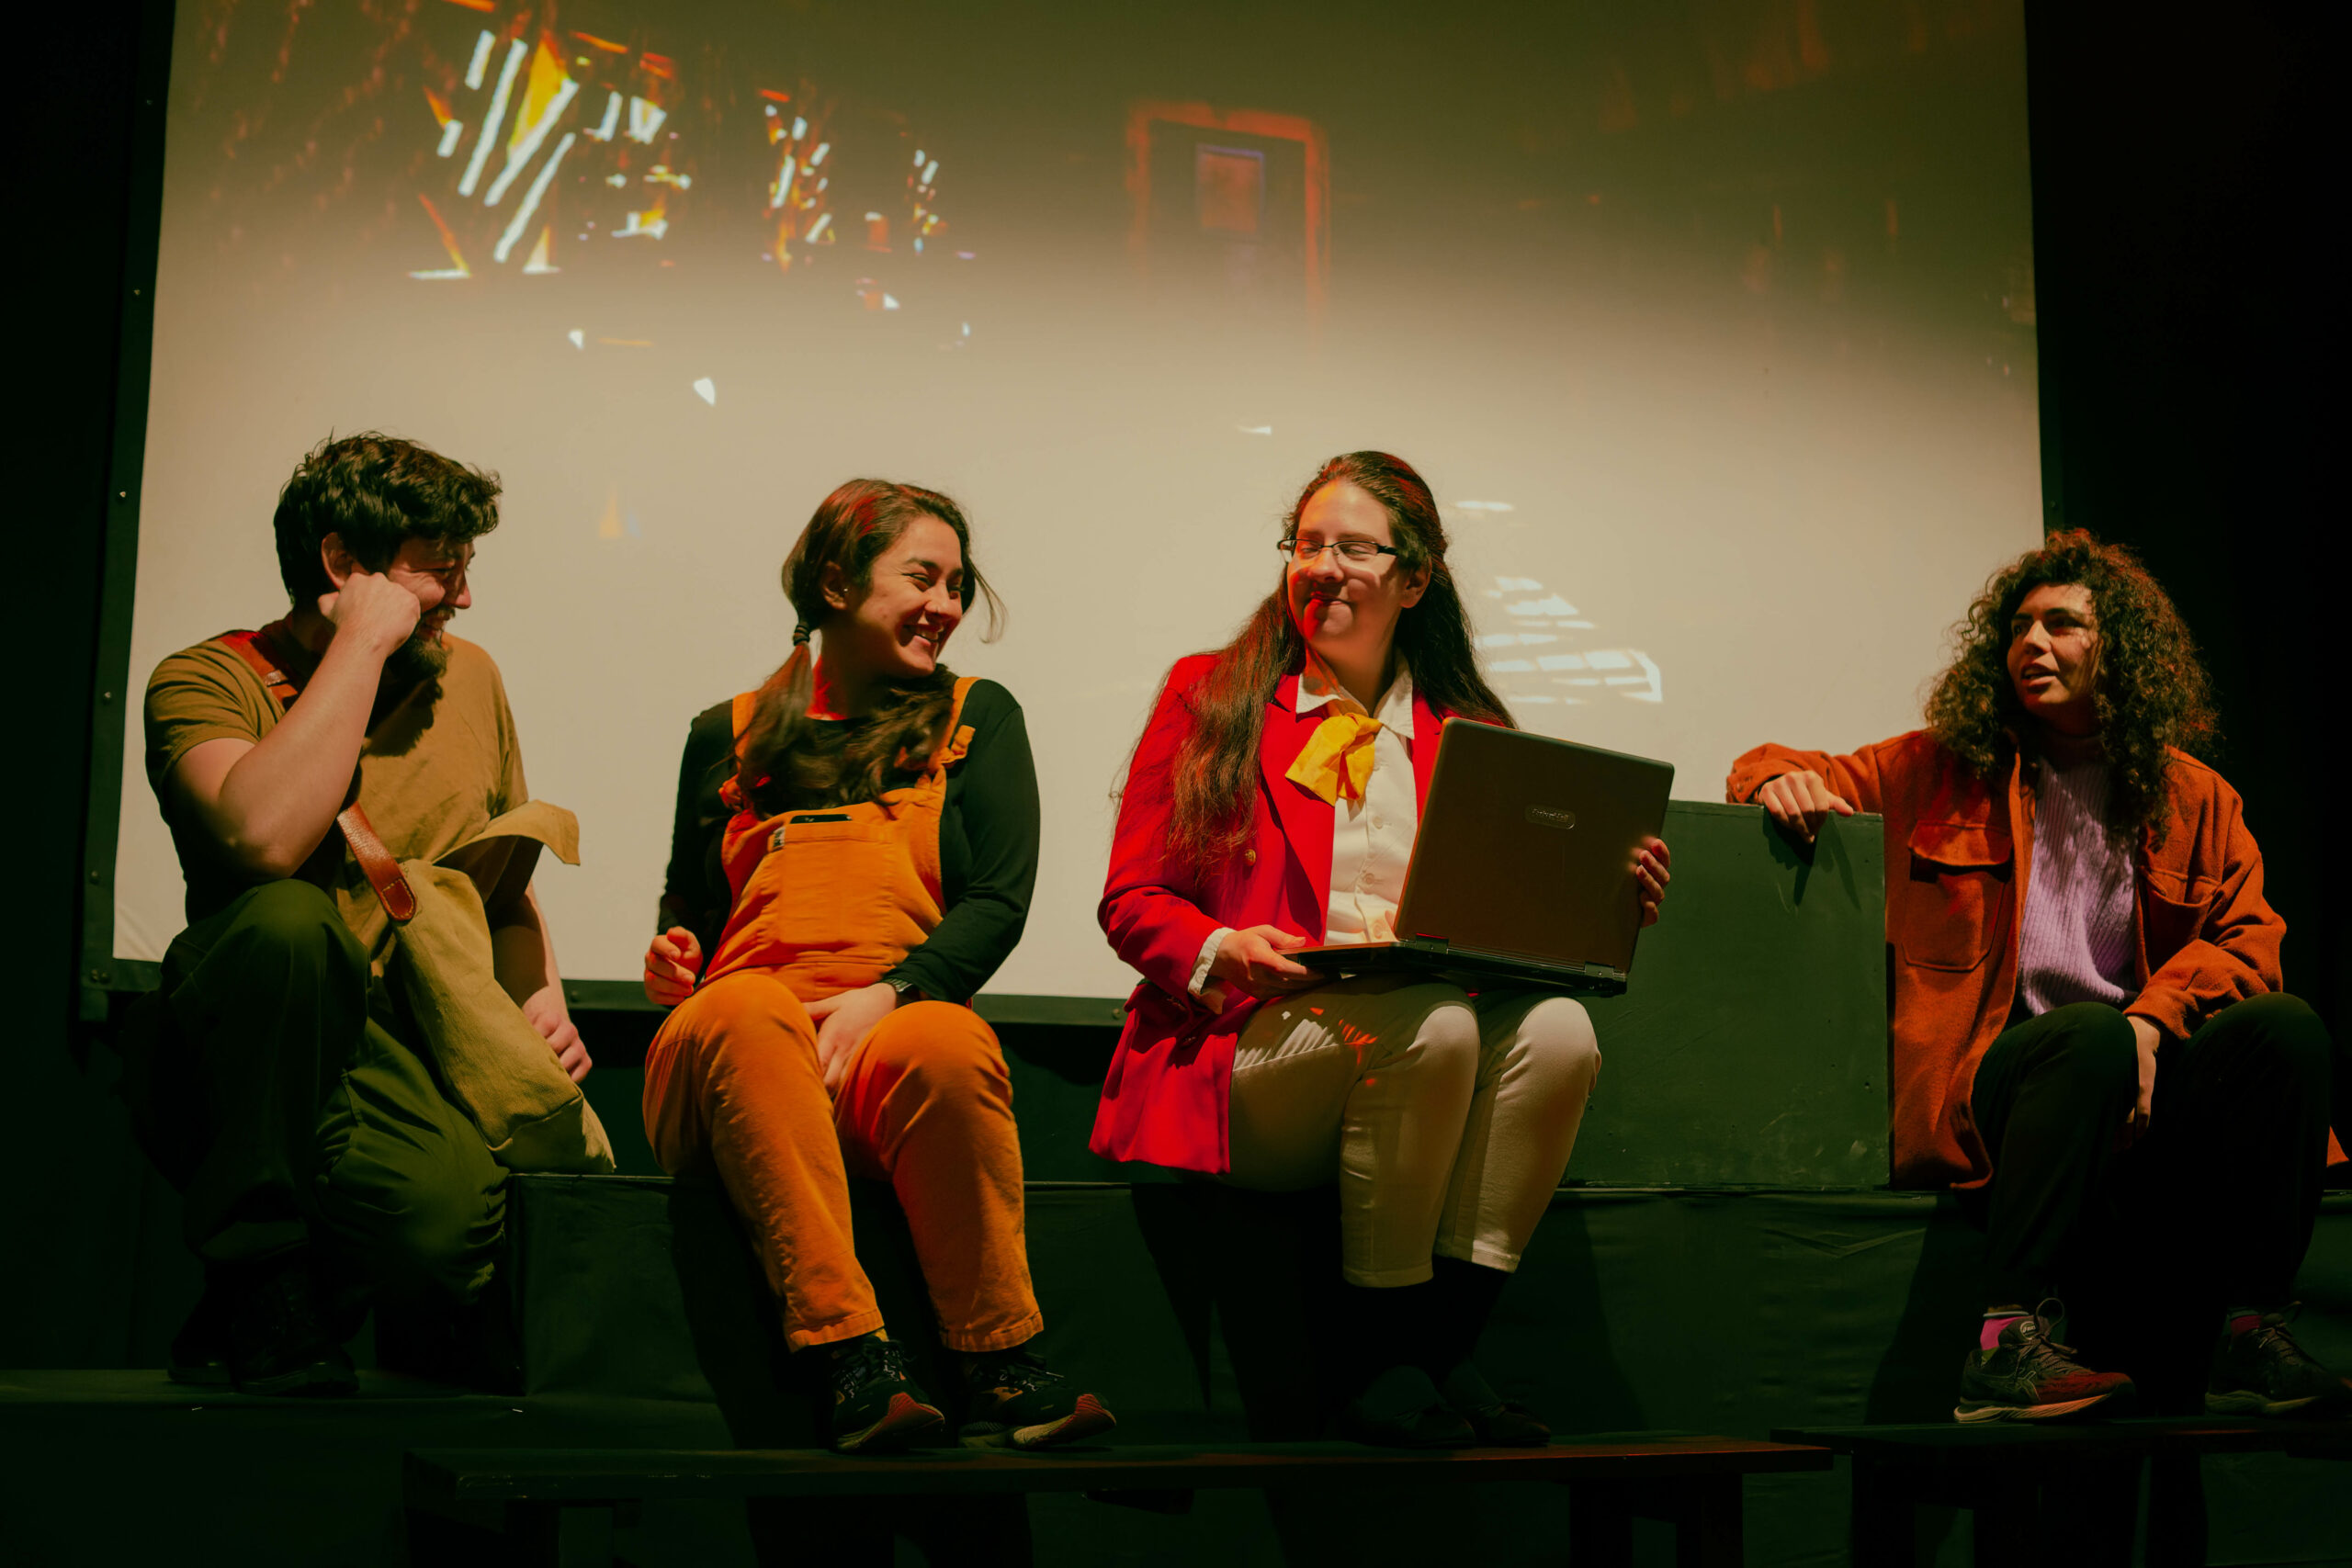 Four actors sit on stage, laughing and smiling with one another. One actor is using a laptop